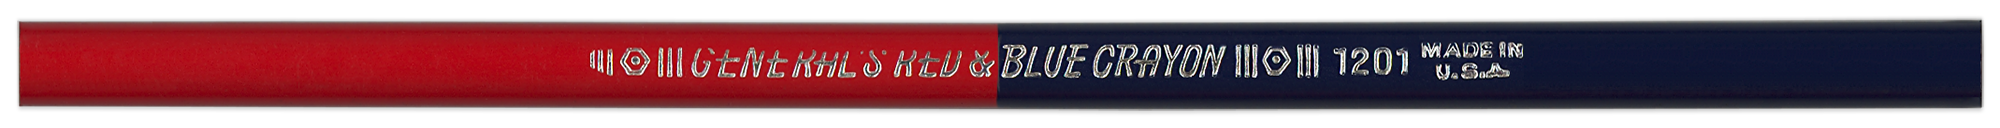 red_blue_crayon_1201